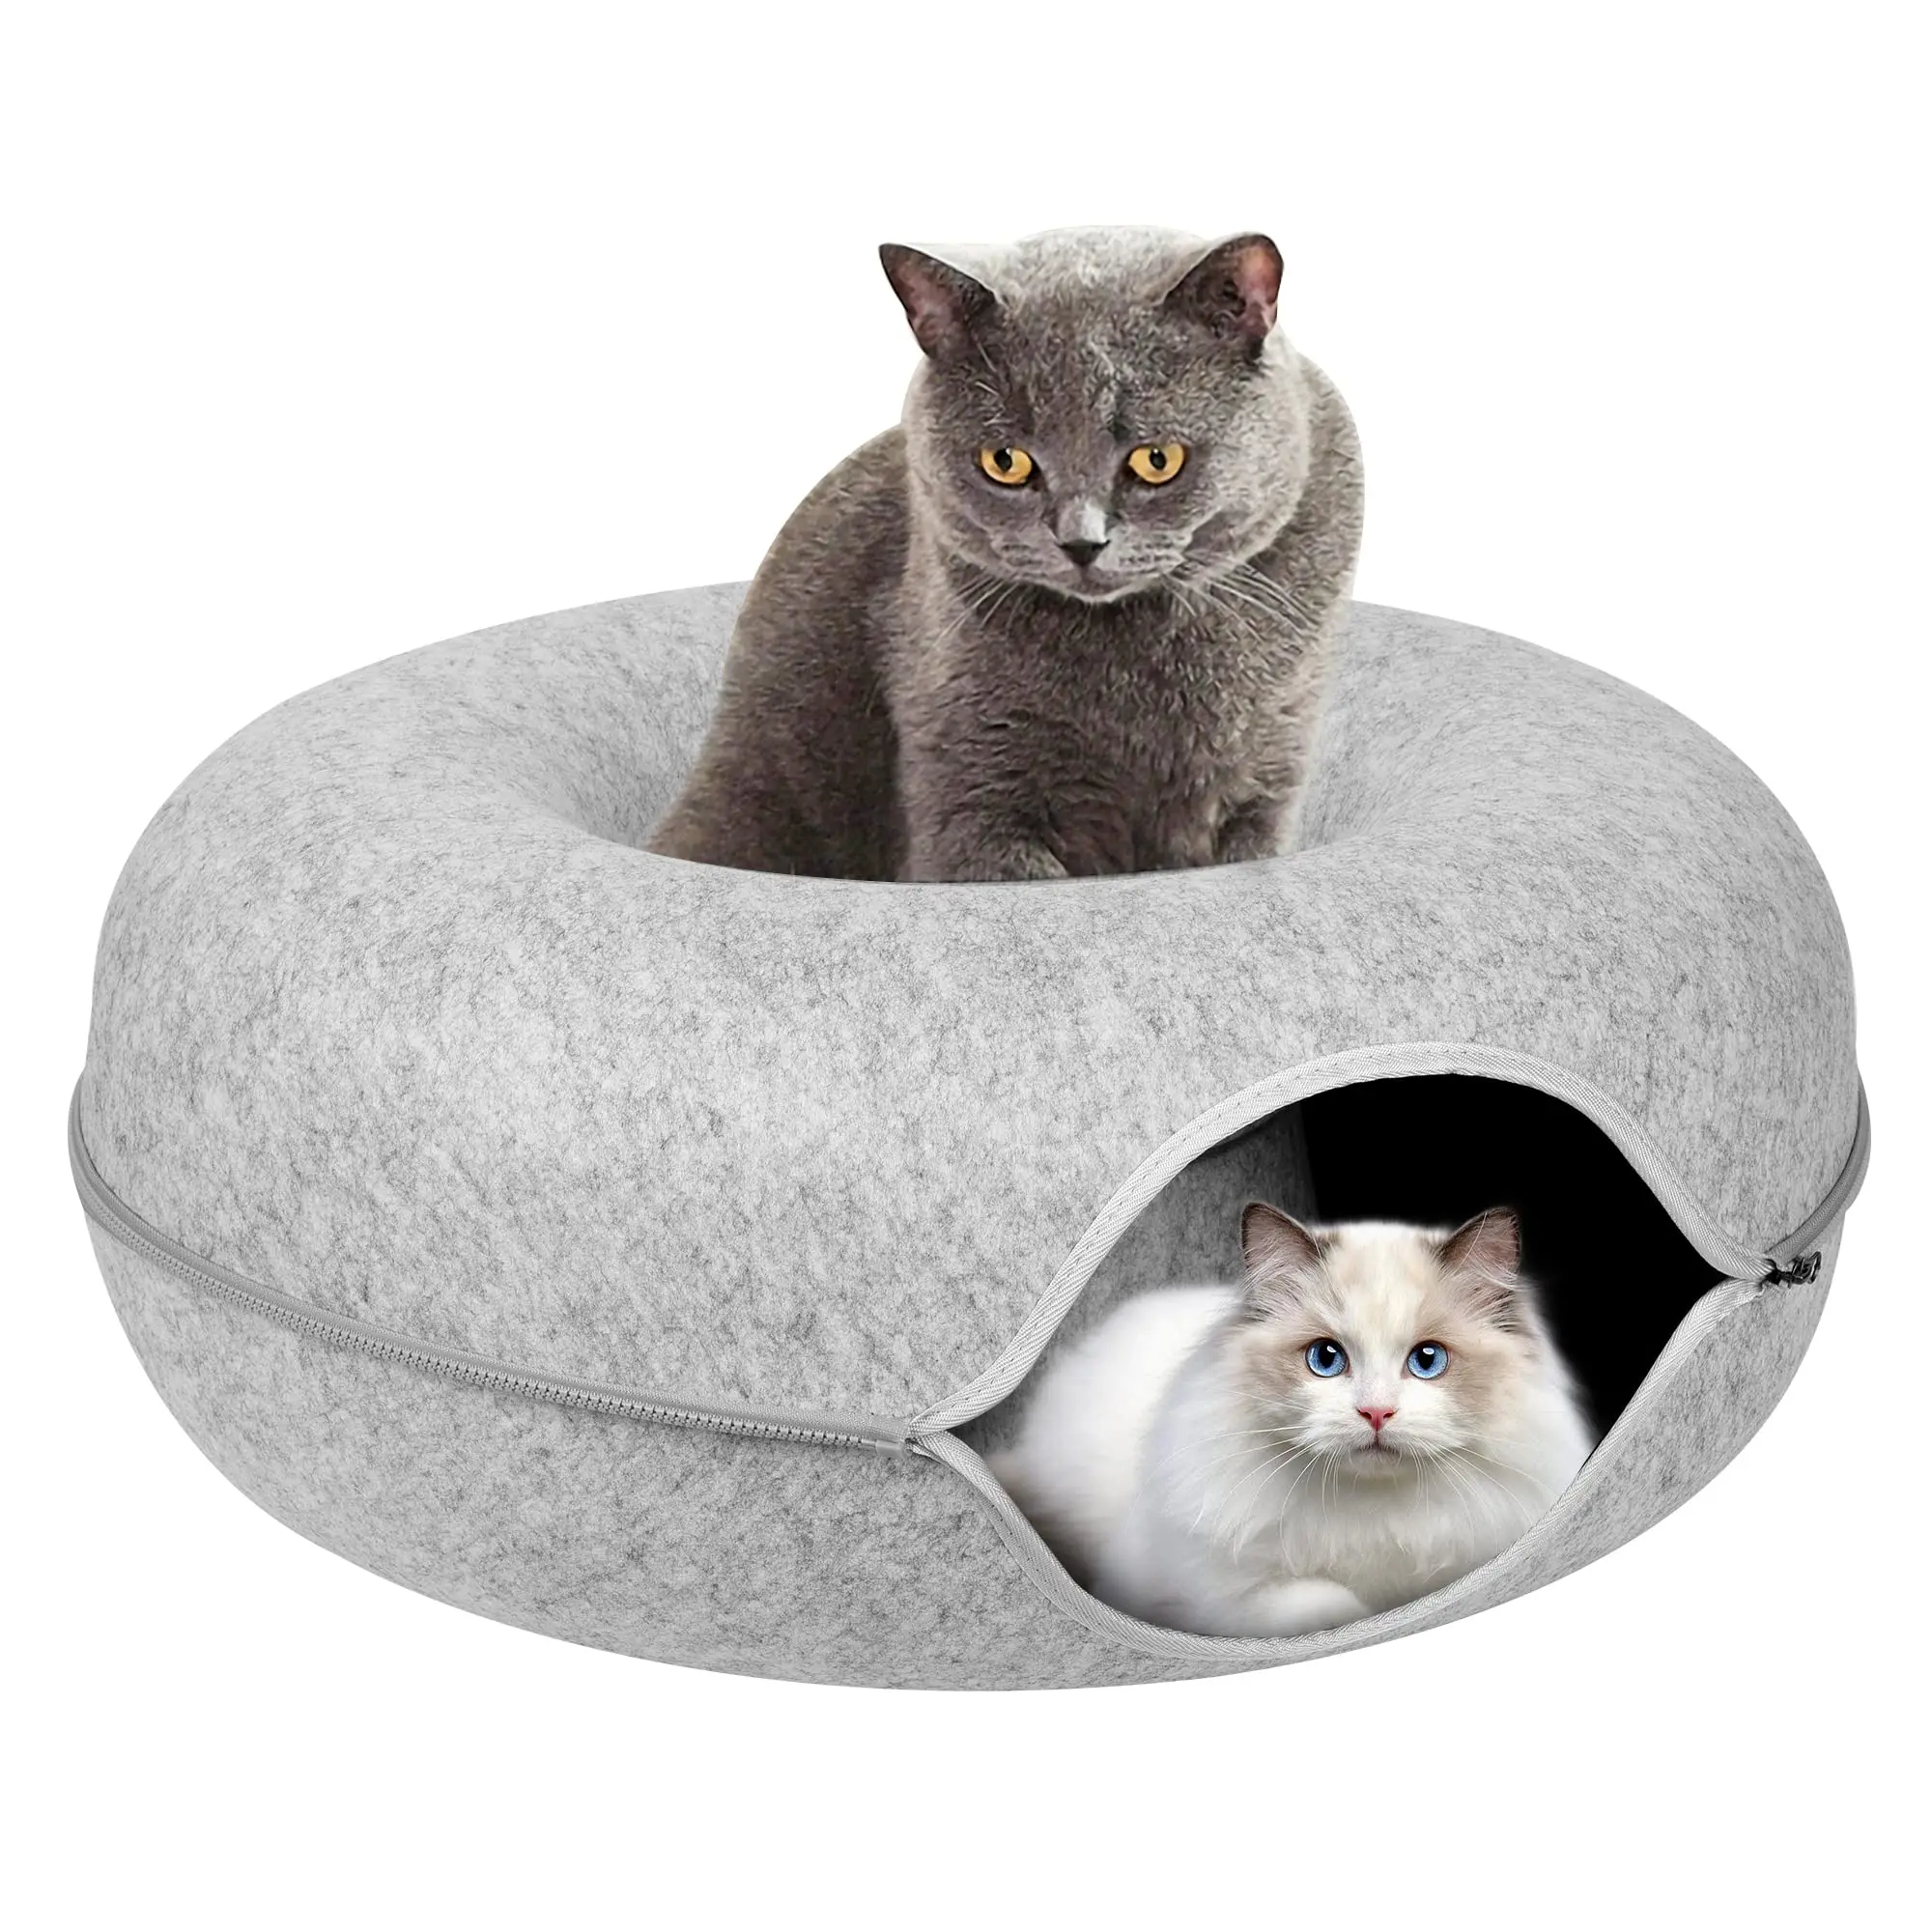 

Cat Tunnel Bed for Indoor Detachable Round Felt & Washable Interior Cat Play Tunnel for Small Pets